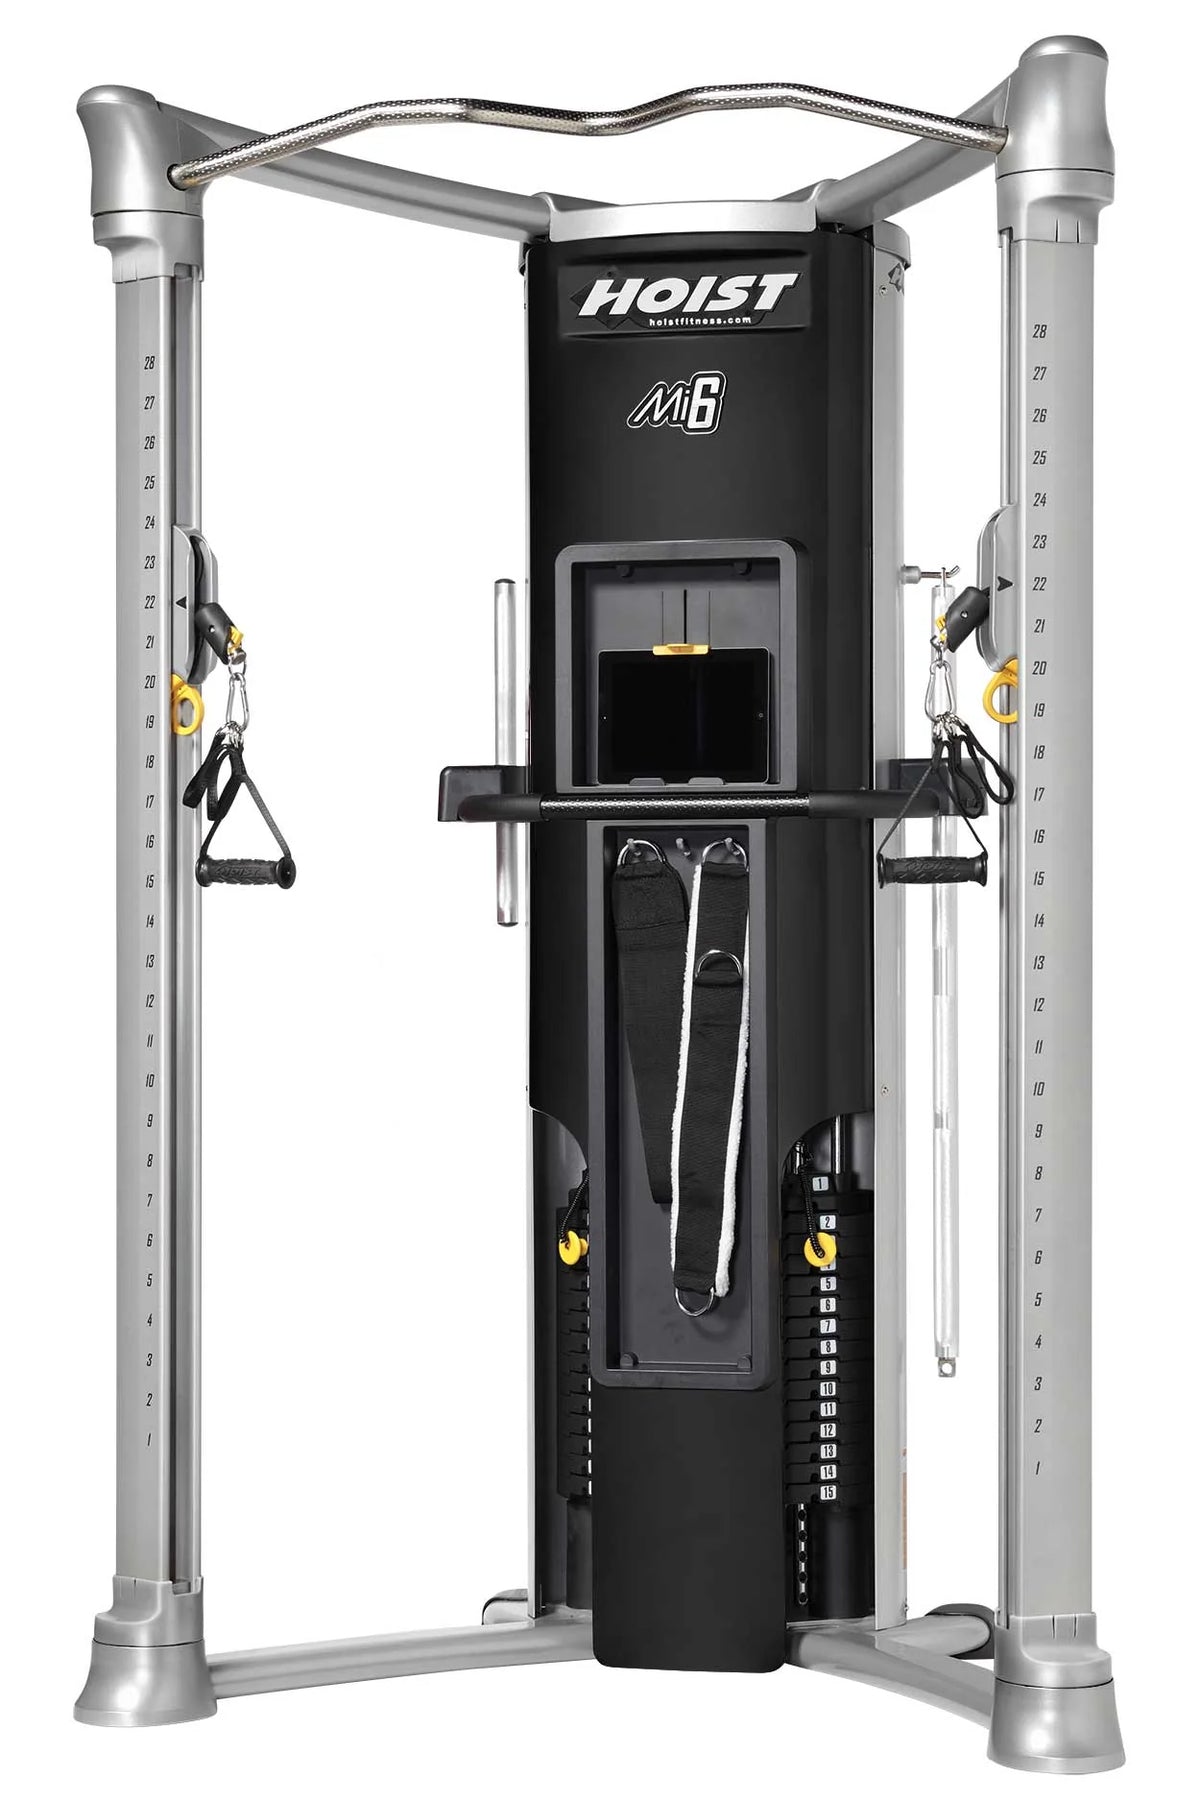 Hoist Fitness Mi6 Functional Trainer System full view | Fitness Experience